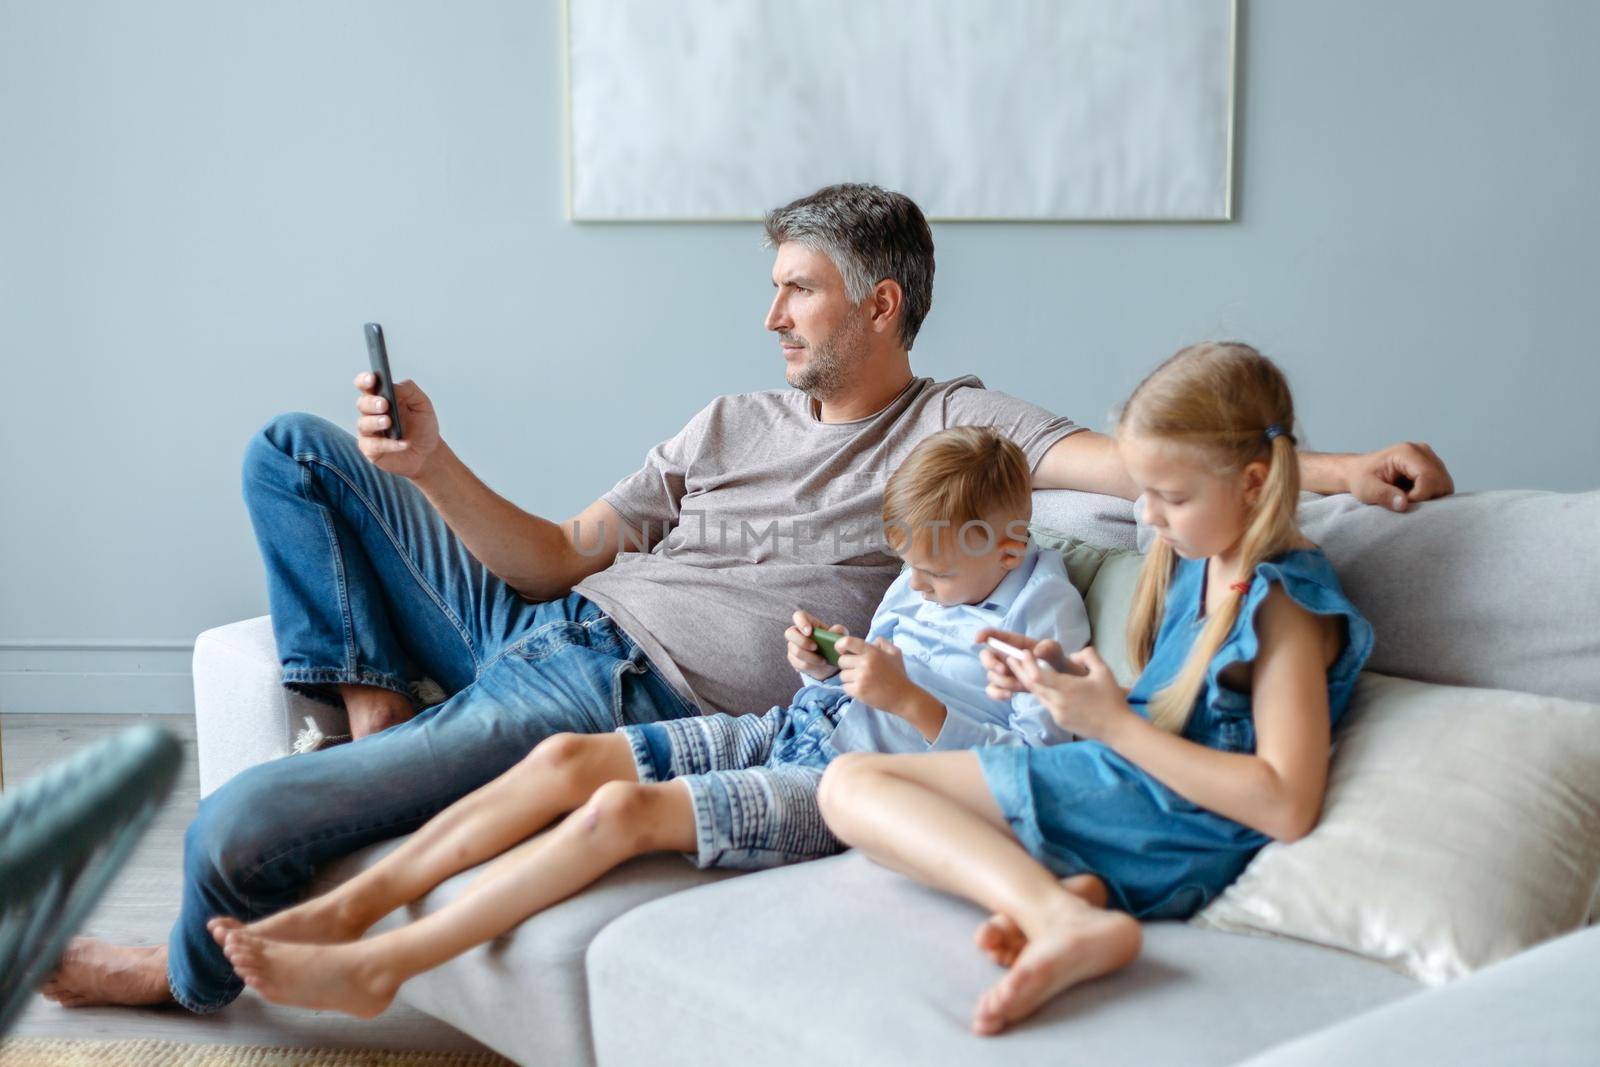 father and two children using their smartphones in their free time. Family staying at home.